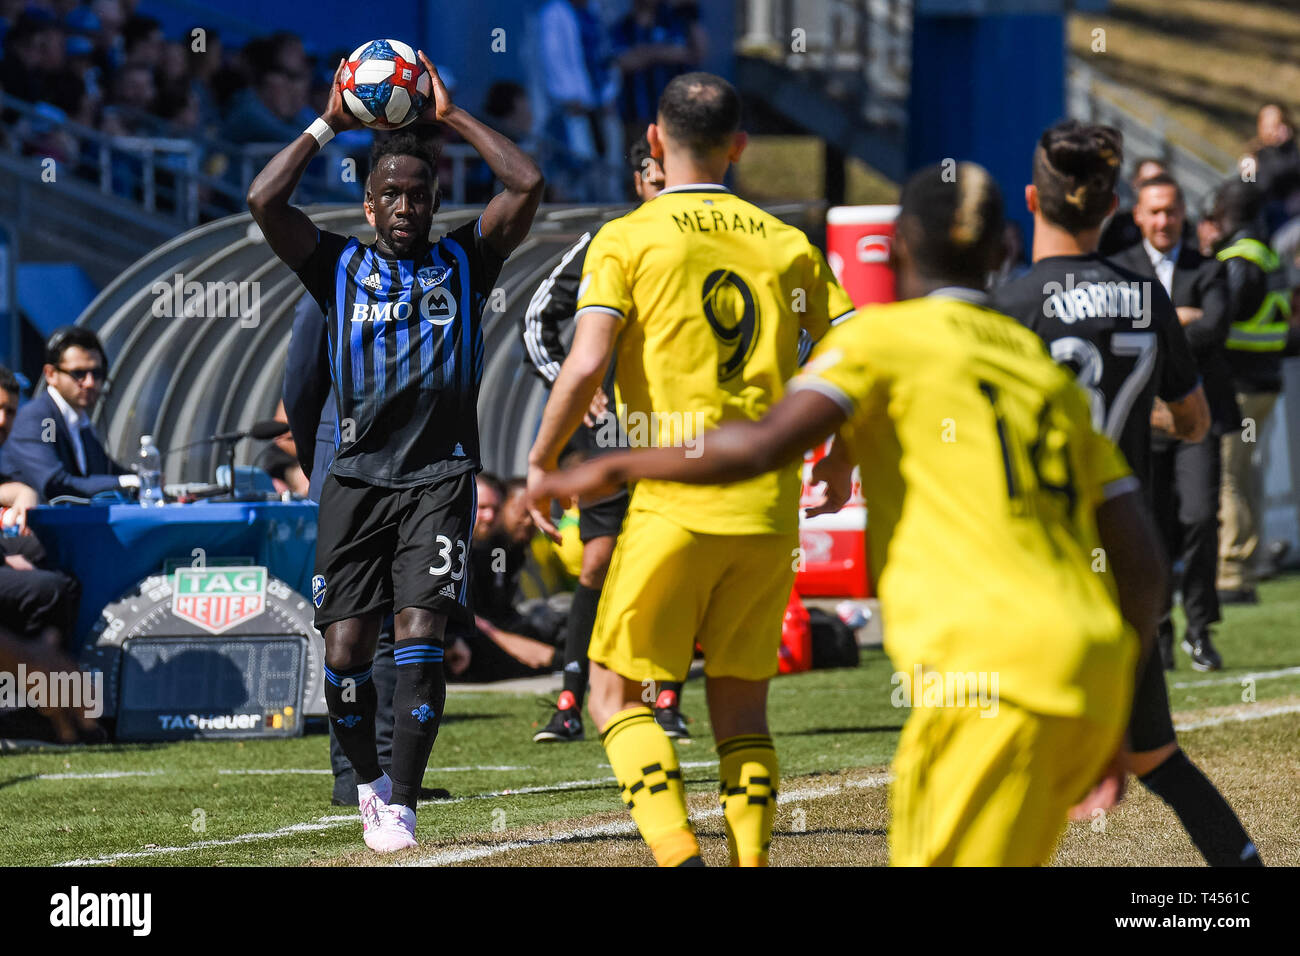 Montreal, Quebec. 13th Apr, 2019. Montreal Impact defender Bacary Sagna (33) puts the ball back into play during the Columbus Crew SC at Montreal Impact game at Saputo Stadium in Montreal, Quebec. David Kirouac/CSM/Alamy Live News Stock Photo